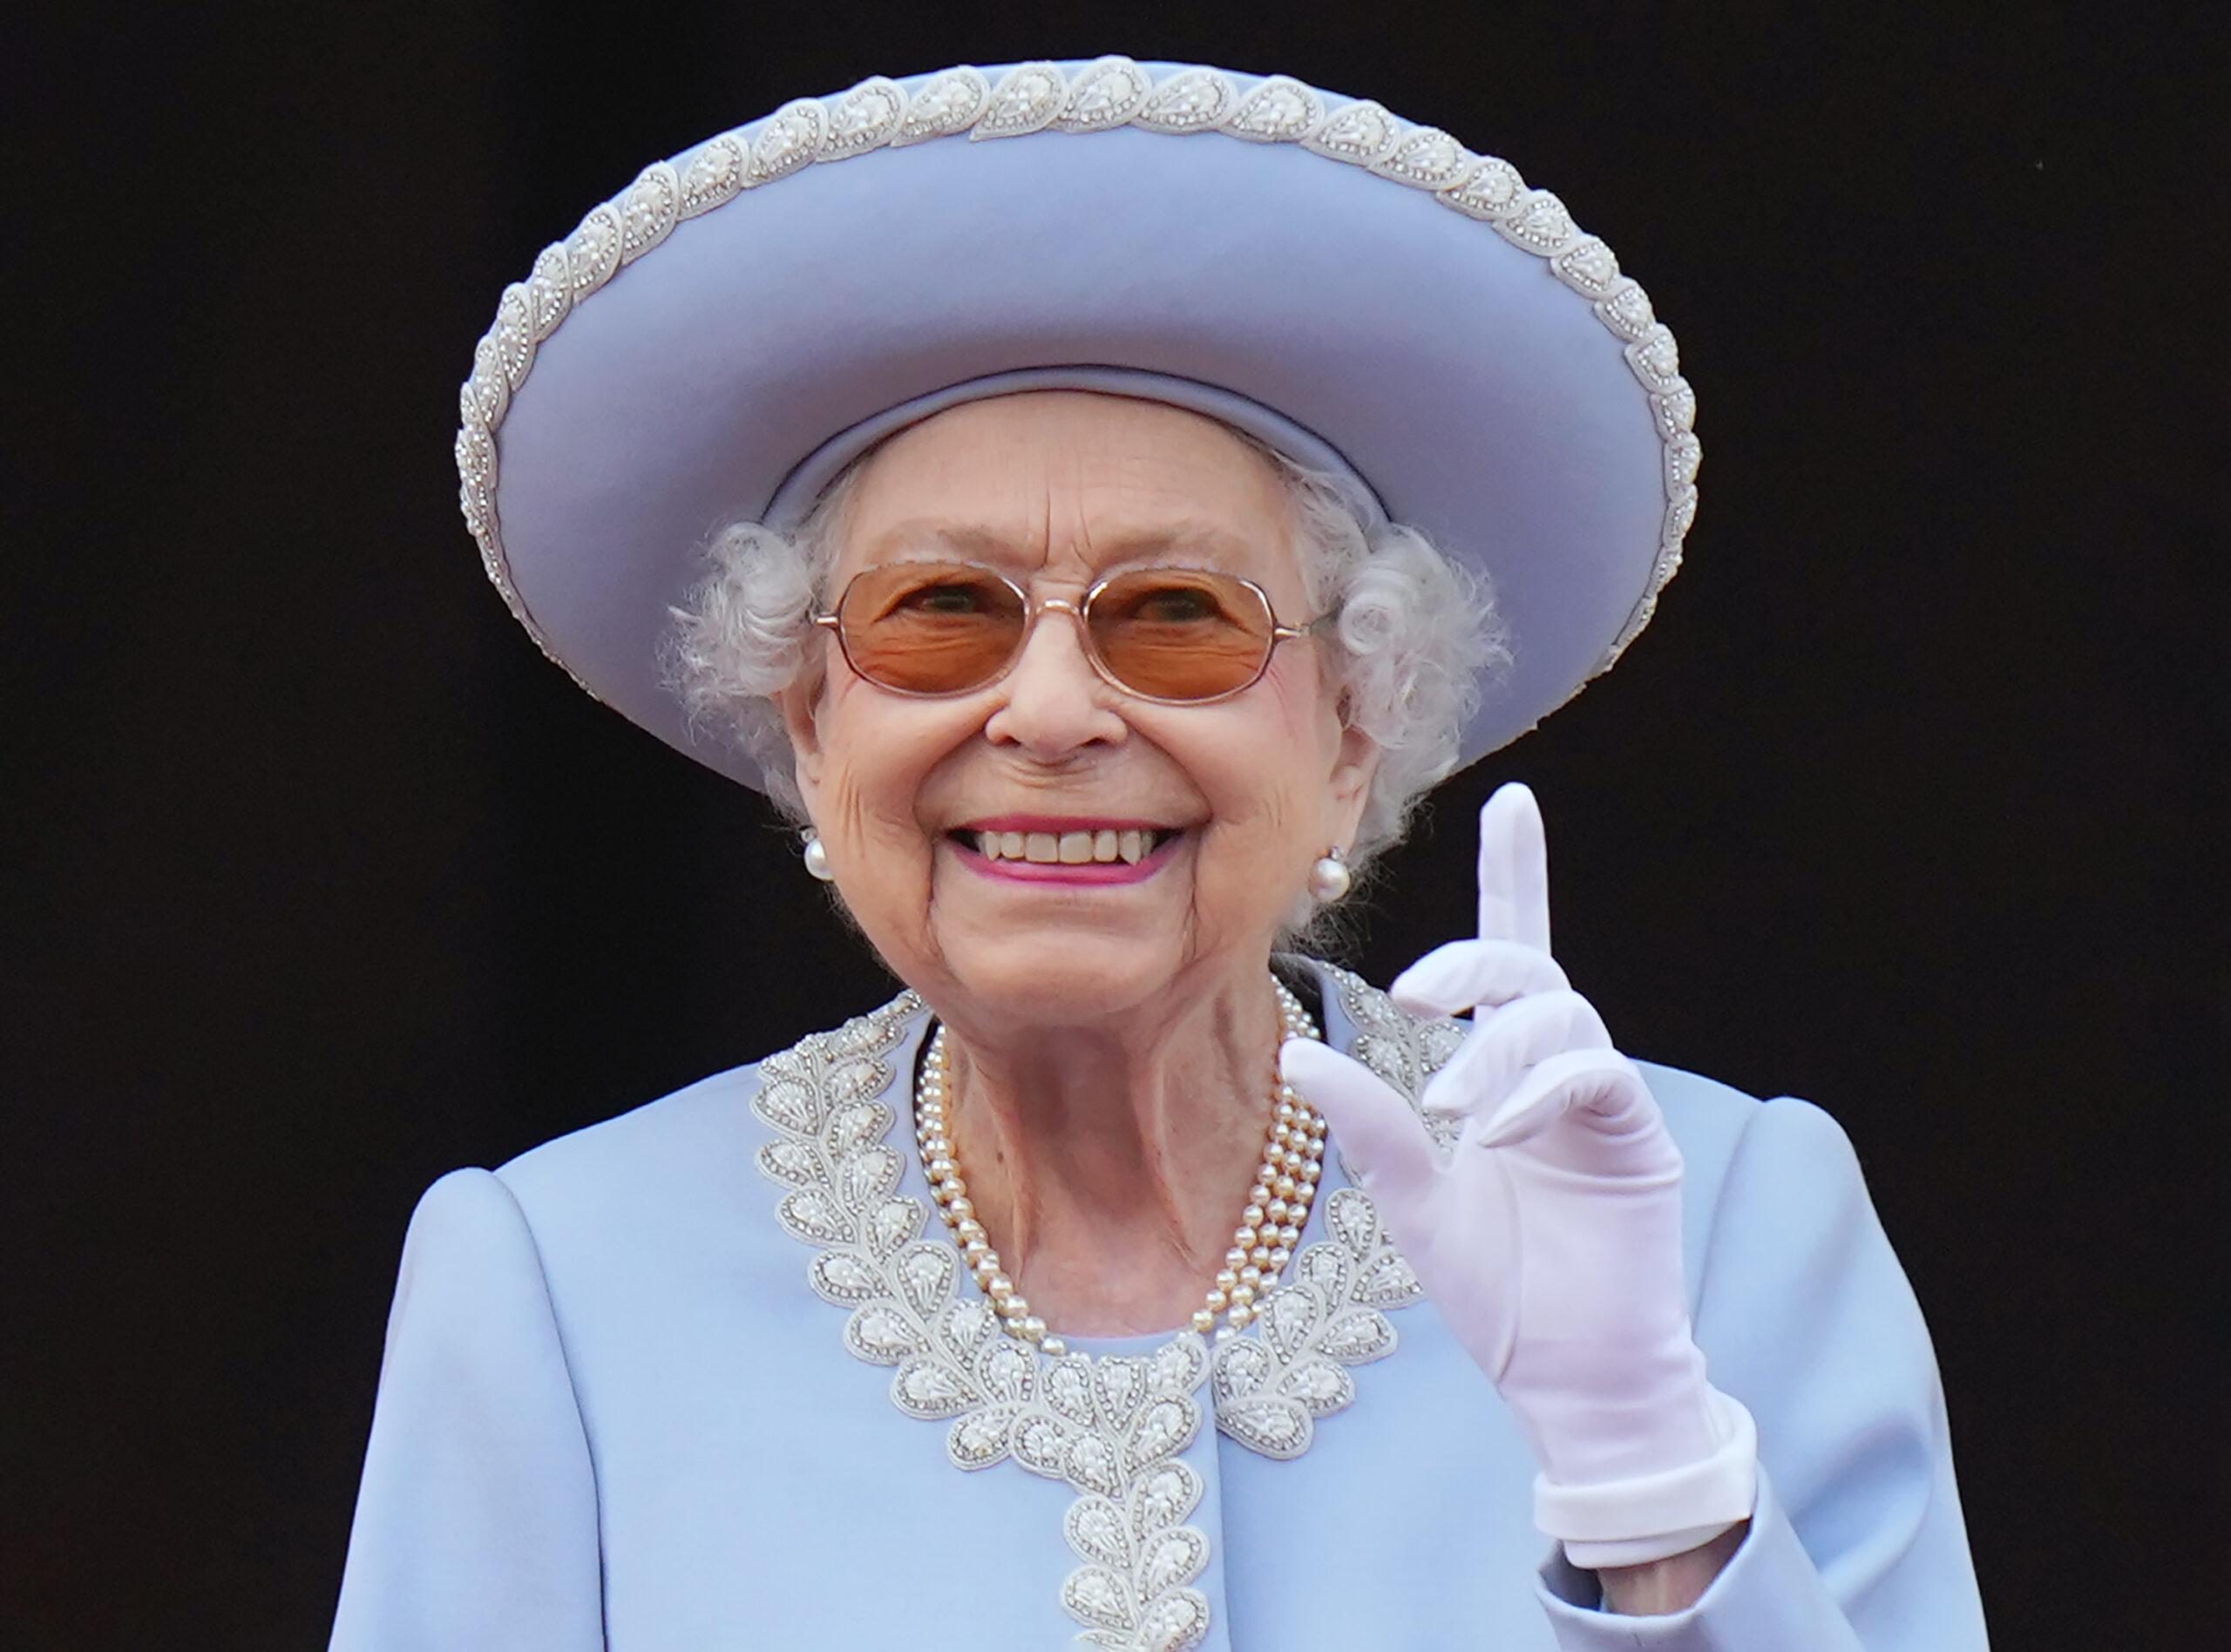 Members of the Royal Family attend Trooping the Colour in The Queen's Platinum Jubilee Year, at Buckingham Palace, London, UK, on the 2nd June 2022. 02 Jun 2022 Pictured: Queen, Queen Elizabeth. 